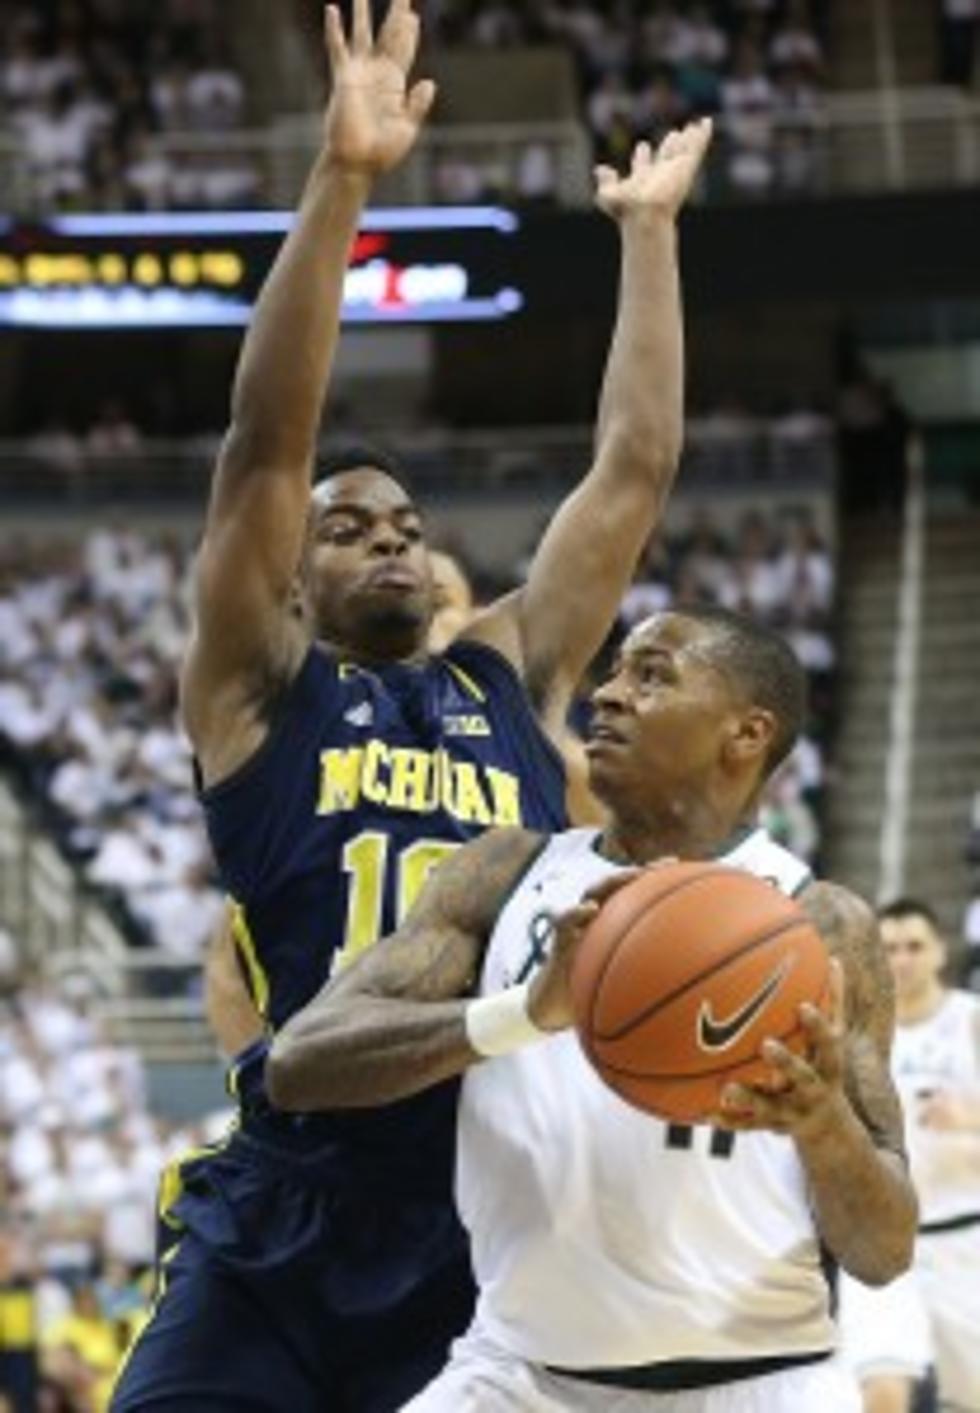 5 Things for Feburary 19: Appling Plans to Play against Purdue